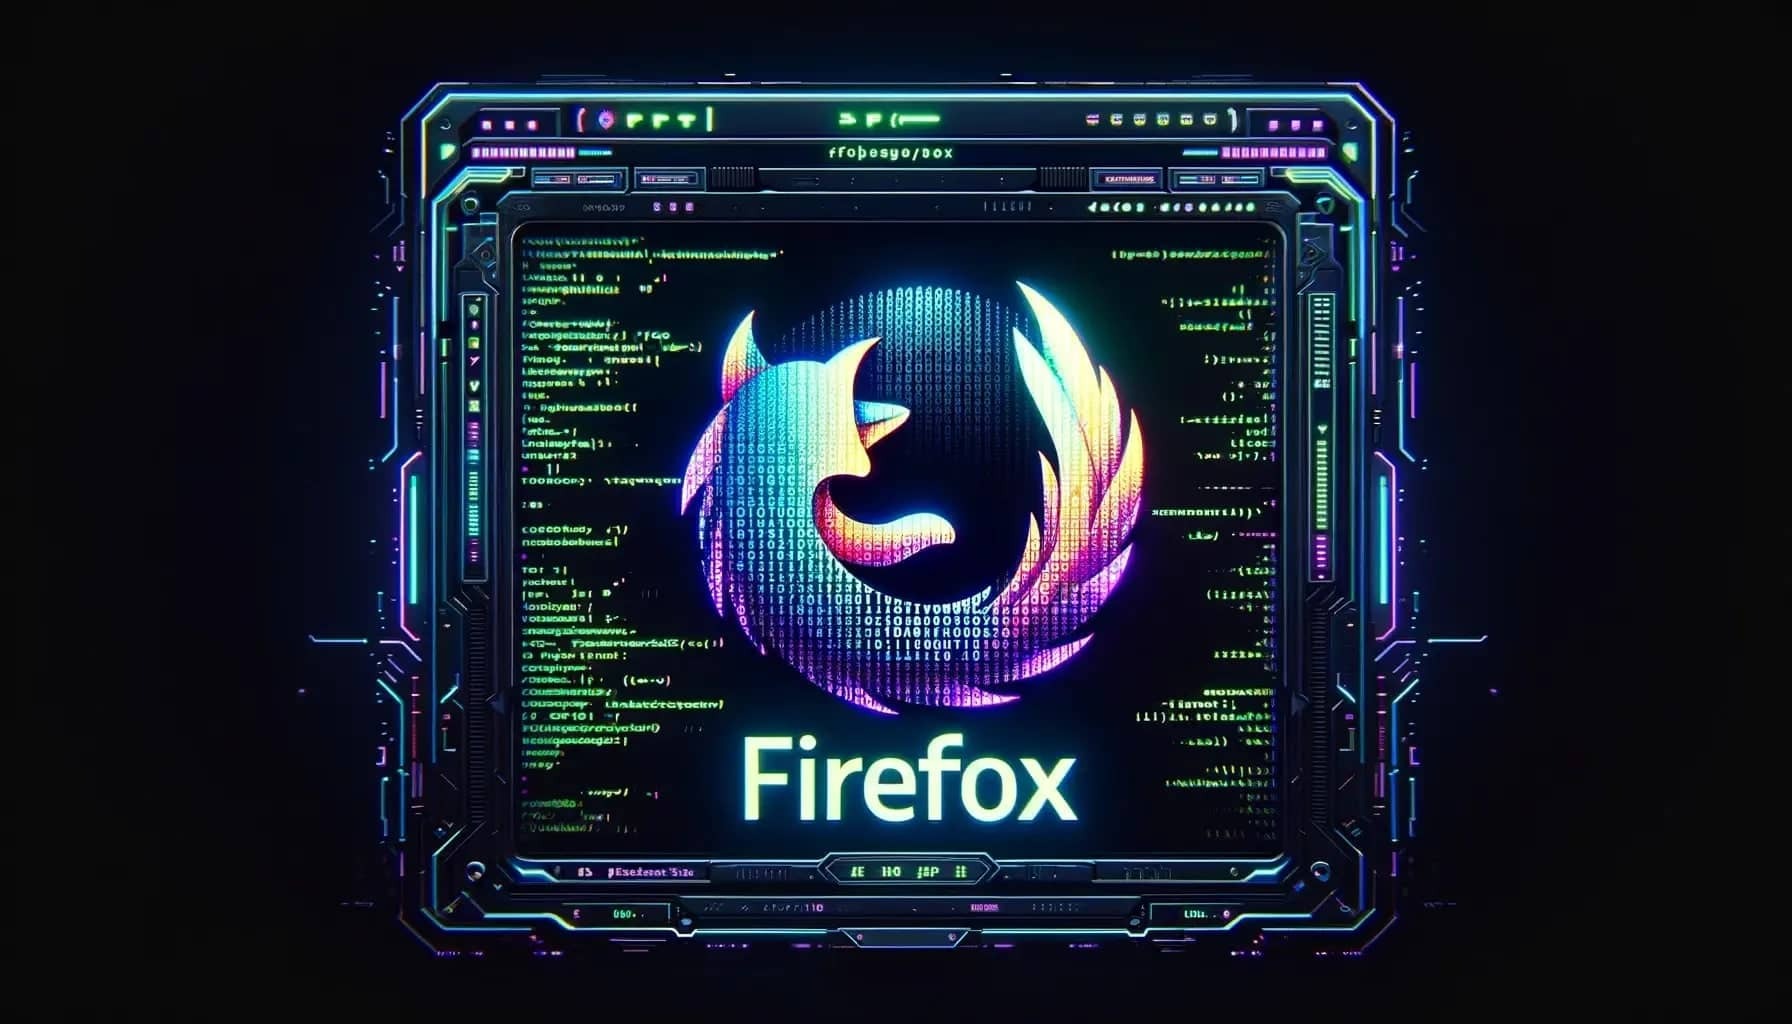 Simplify Your Browsing: Open Firefox URLs with Aliases in Terminal blog post image